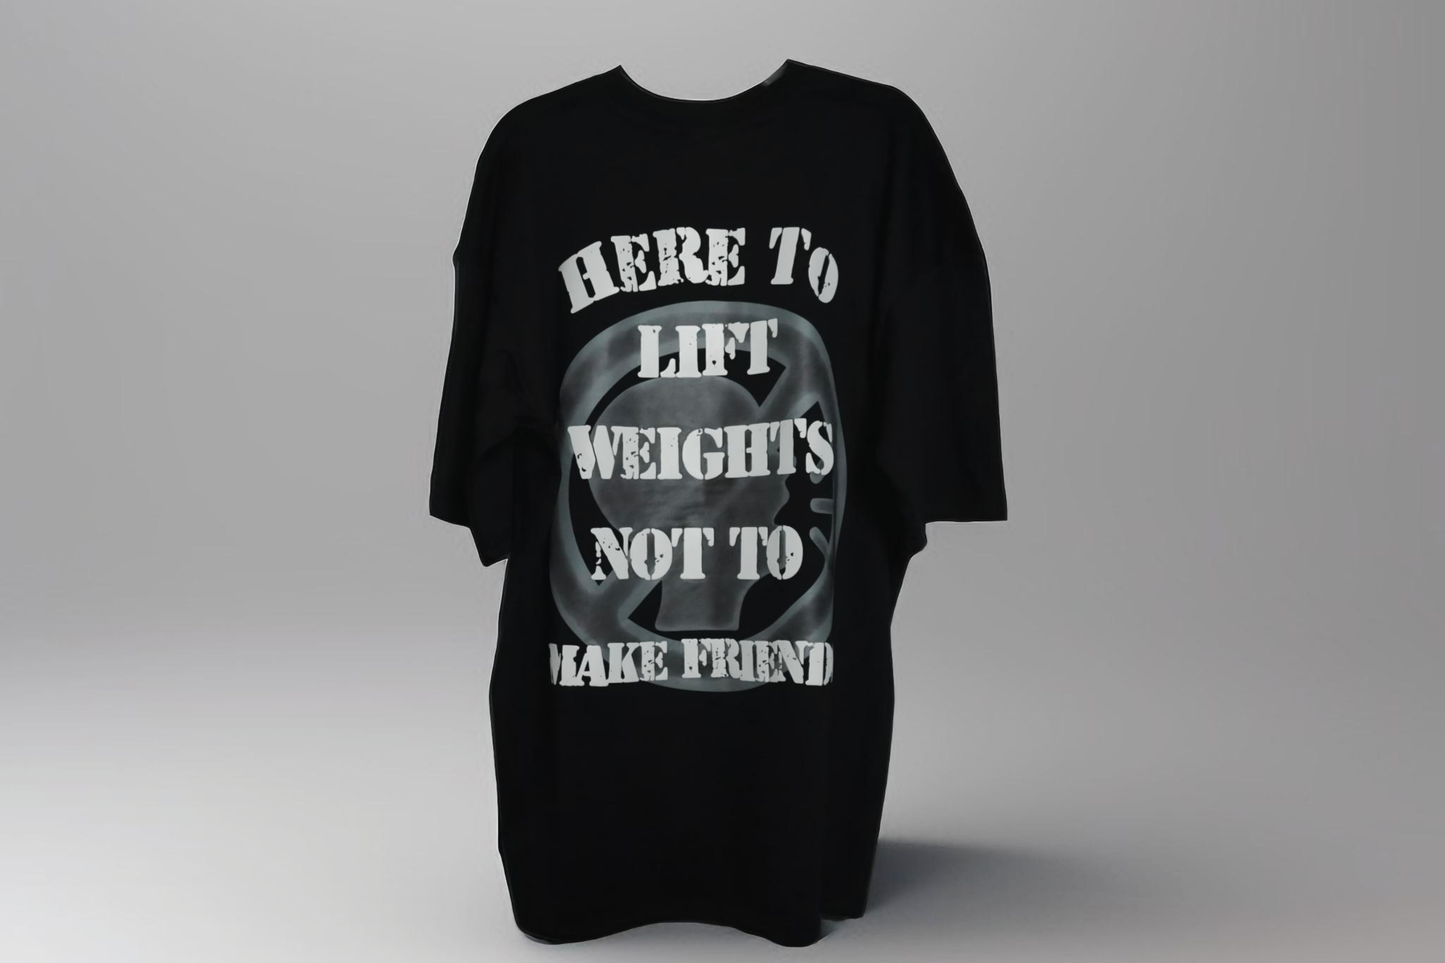 TRICOU OVERSIZED "HERE TO LIFT WEIGTHS NOT TO MAKE FRIENDS" (Negru)